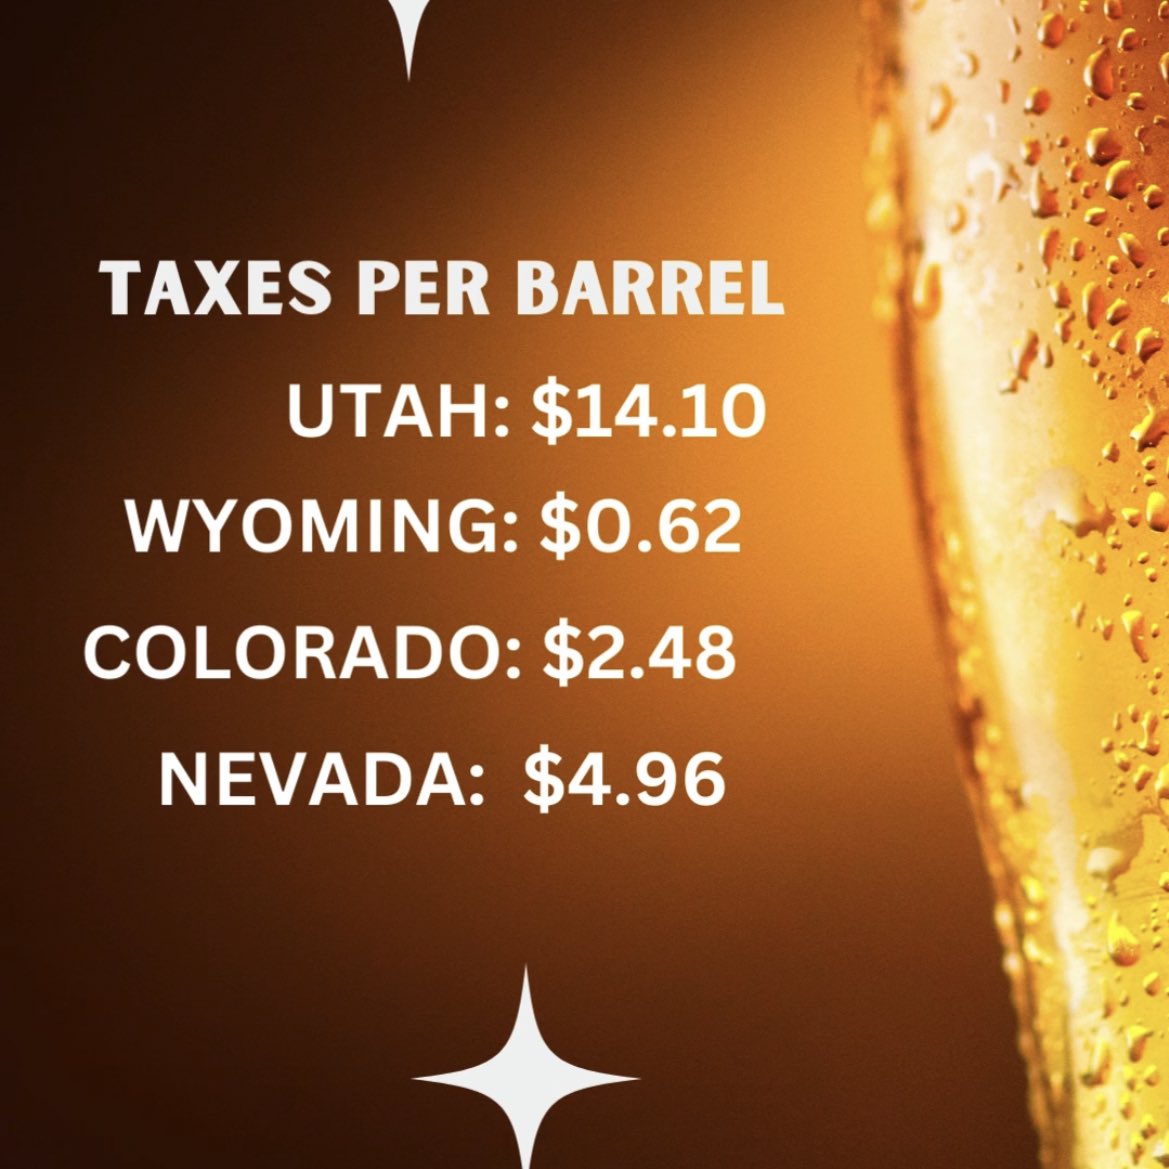 Utah doing everything it can to kill local breweries. Such a joke.